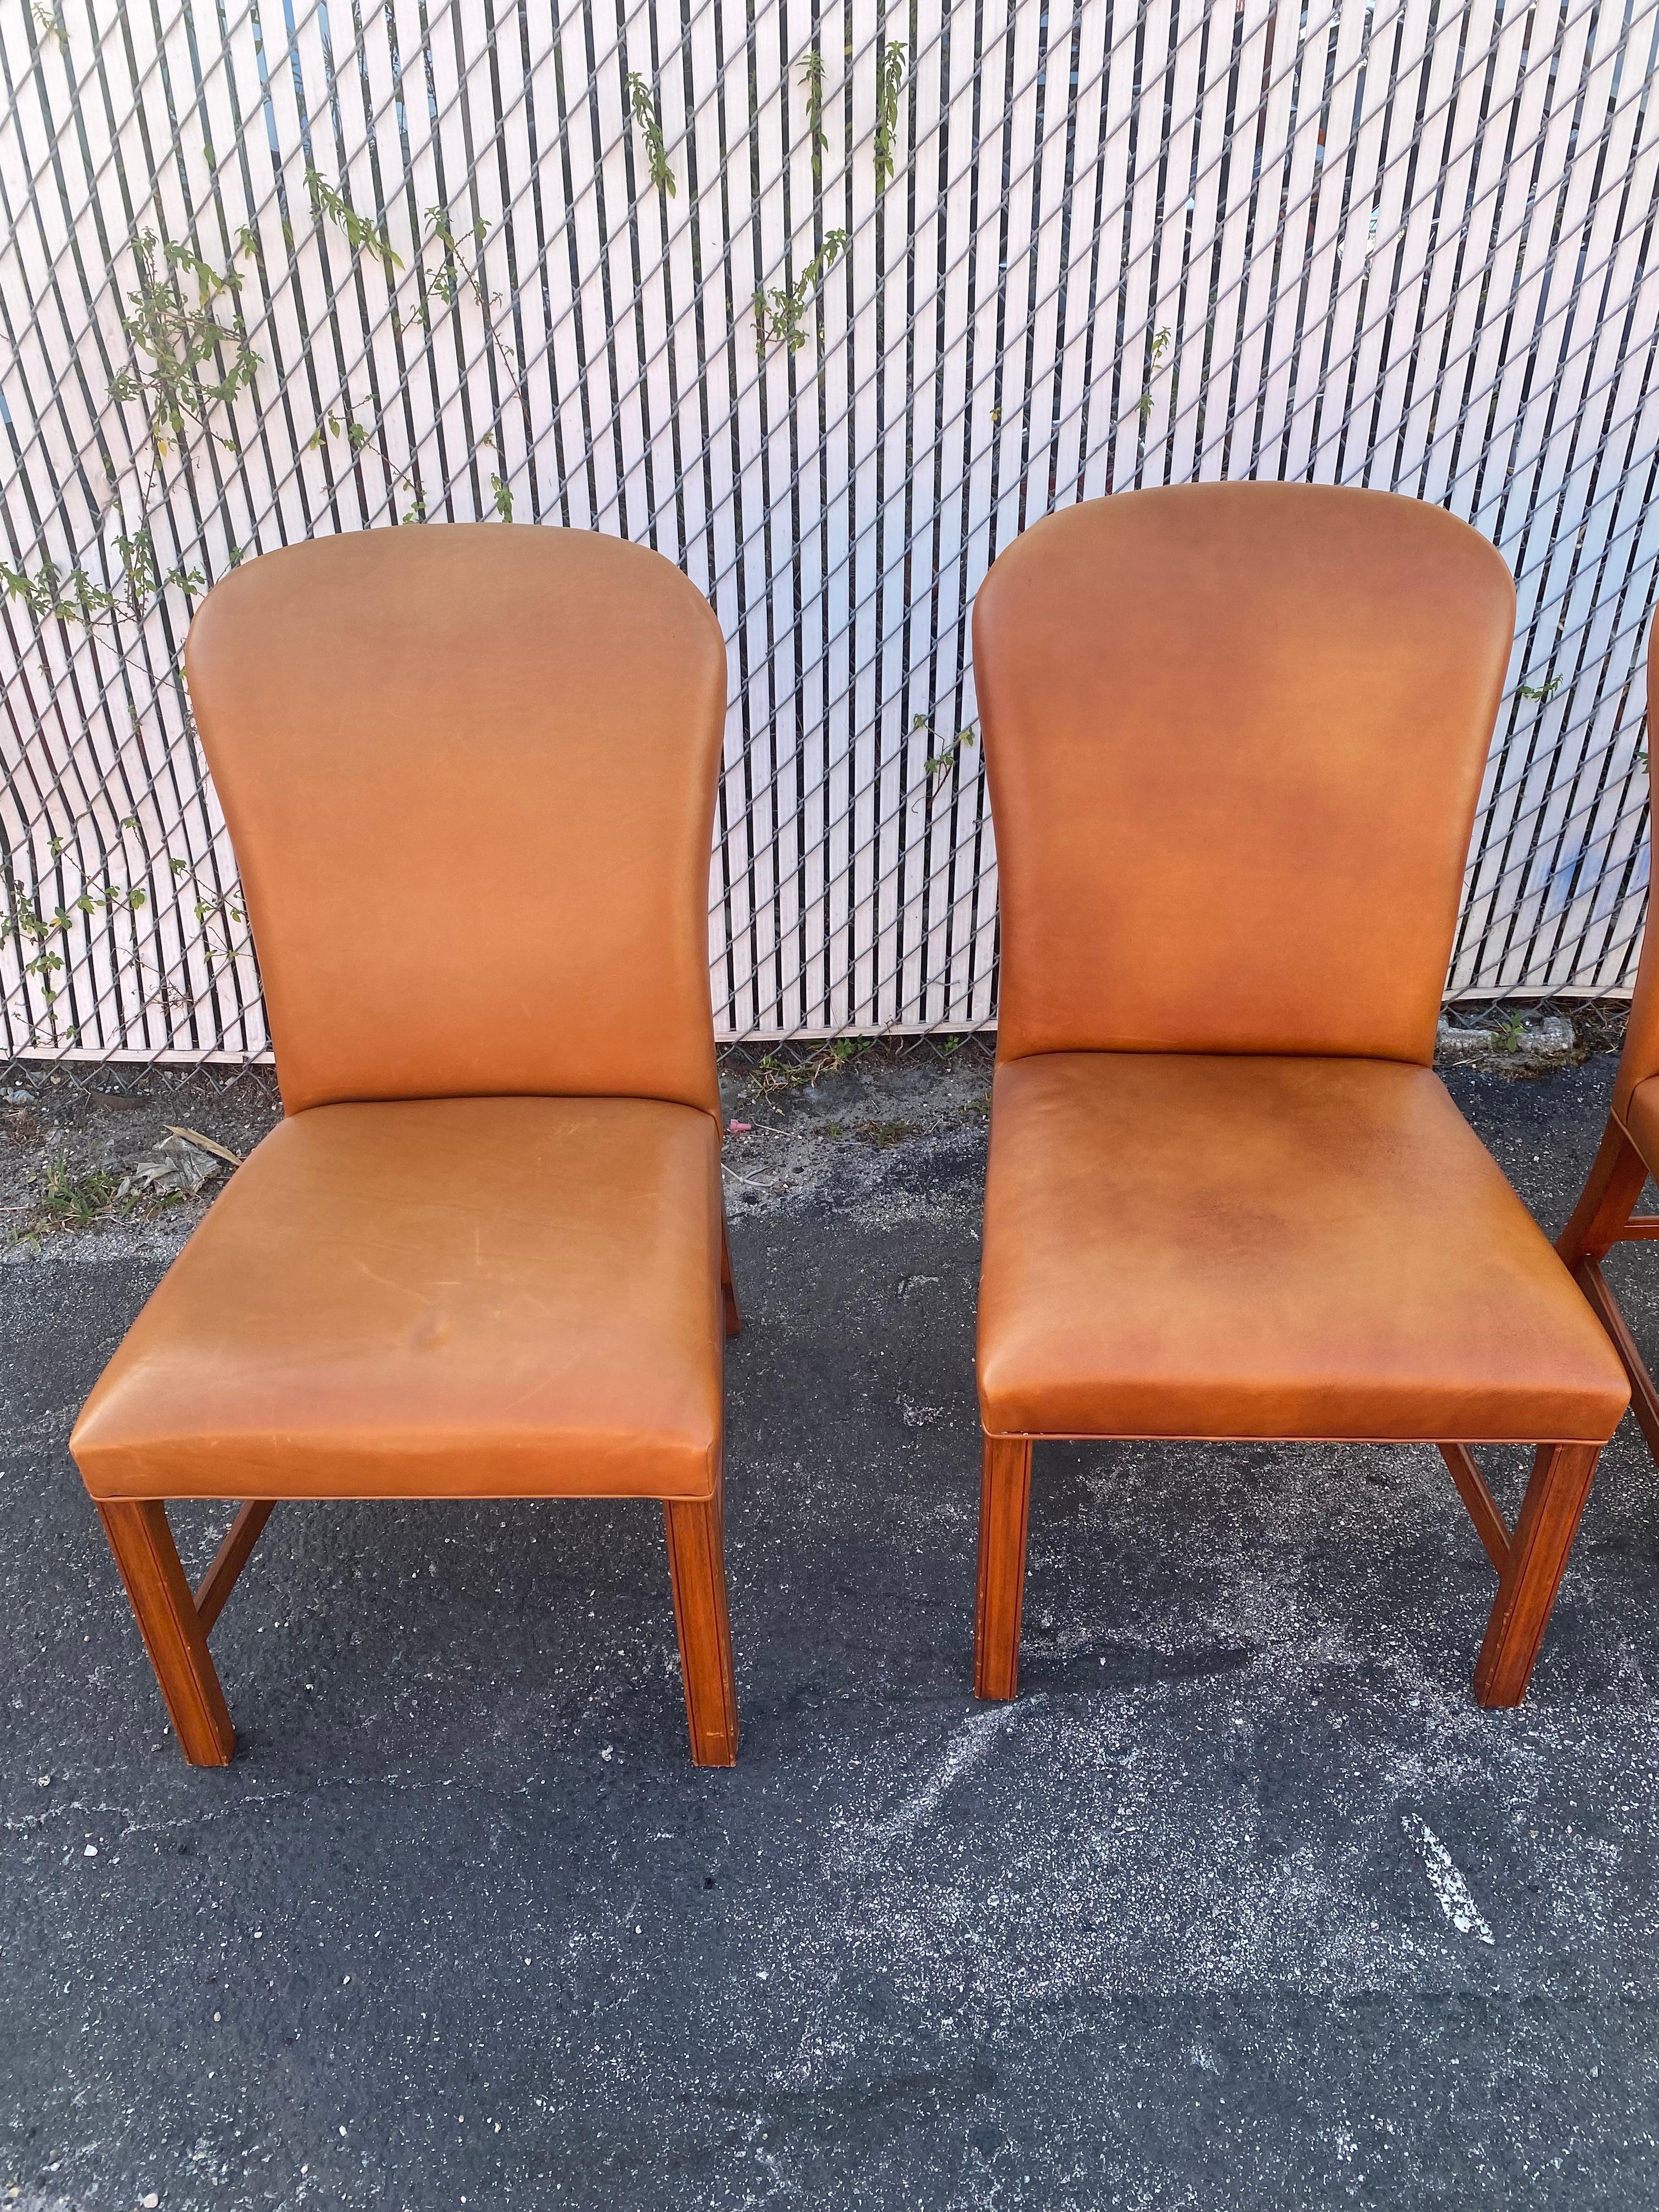 2000s Ralph Lauren Saddle Leather Dining Chairs, Set of 4 For Sale 2